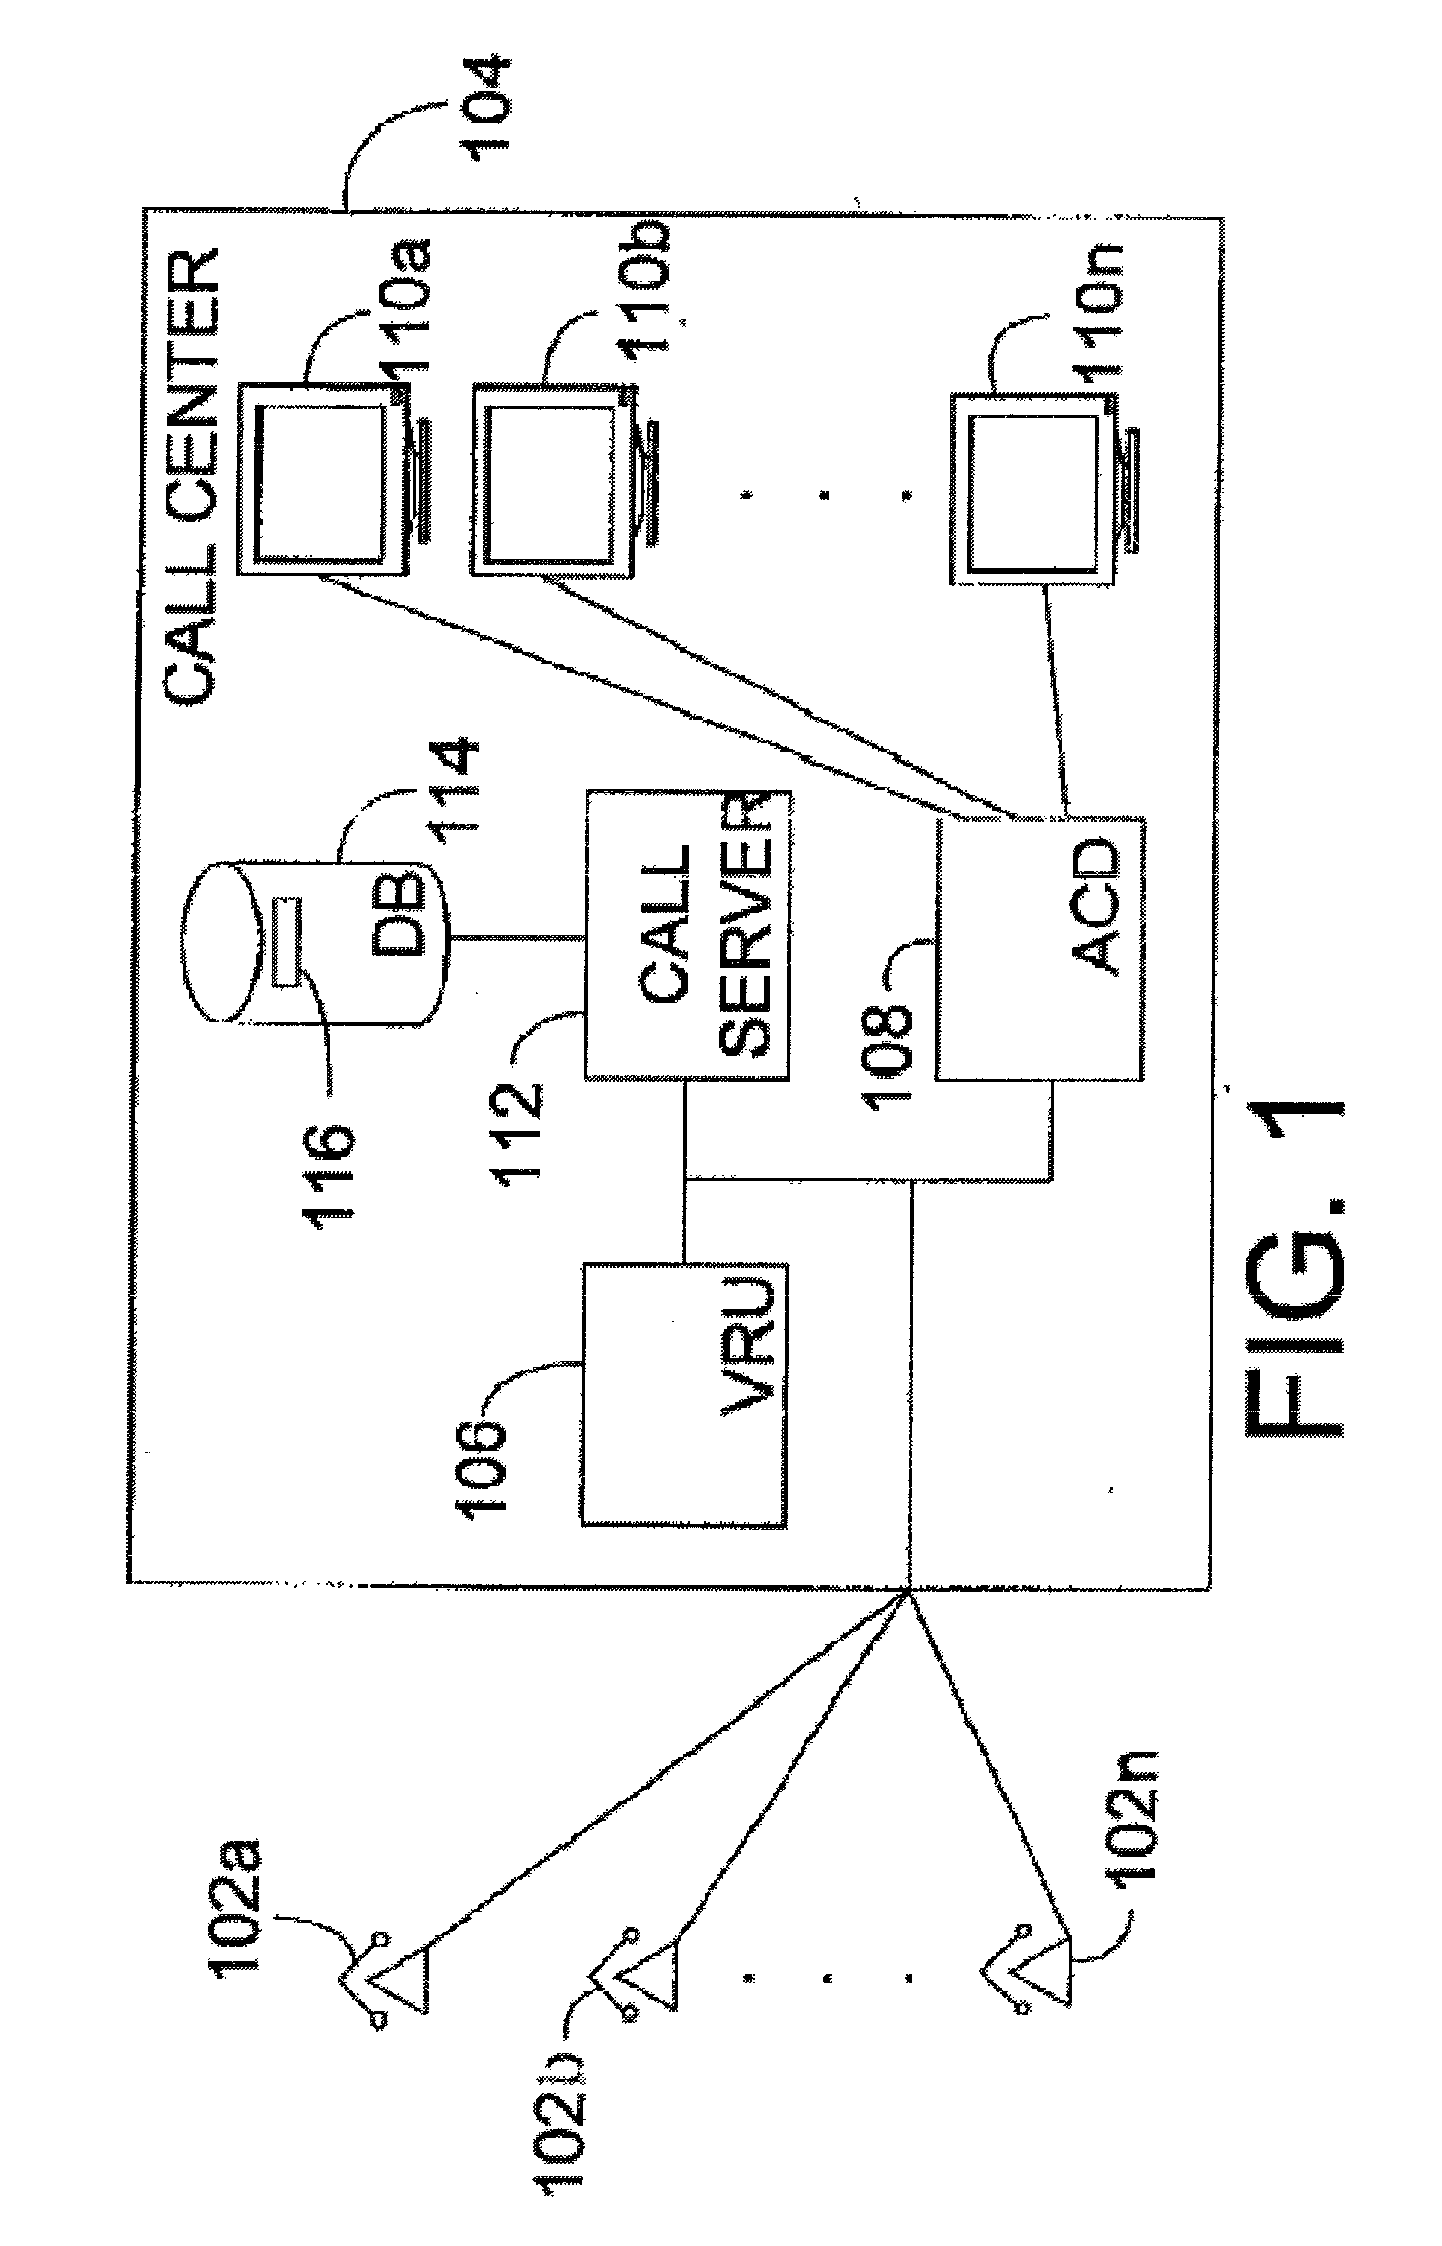 Method and system for informing customer service agent of details of user's interaction with voice-based knowledge retrieval system